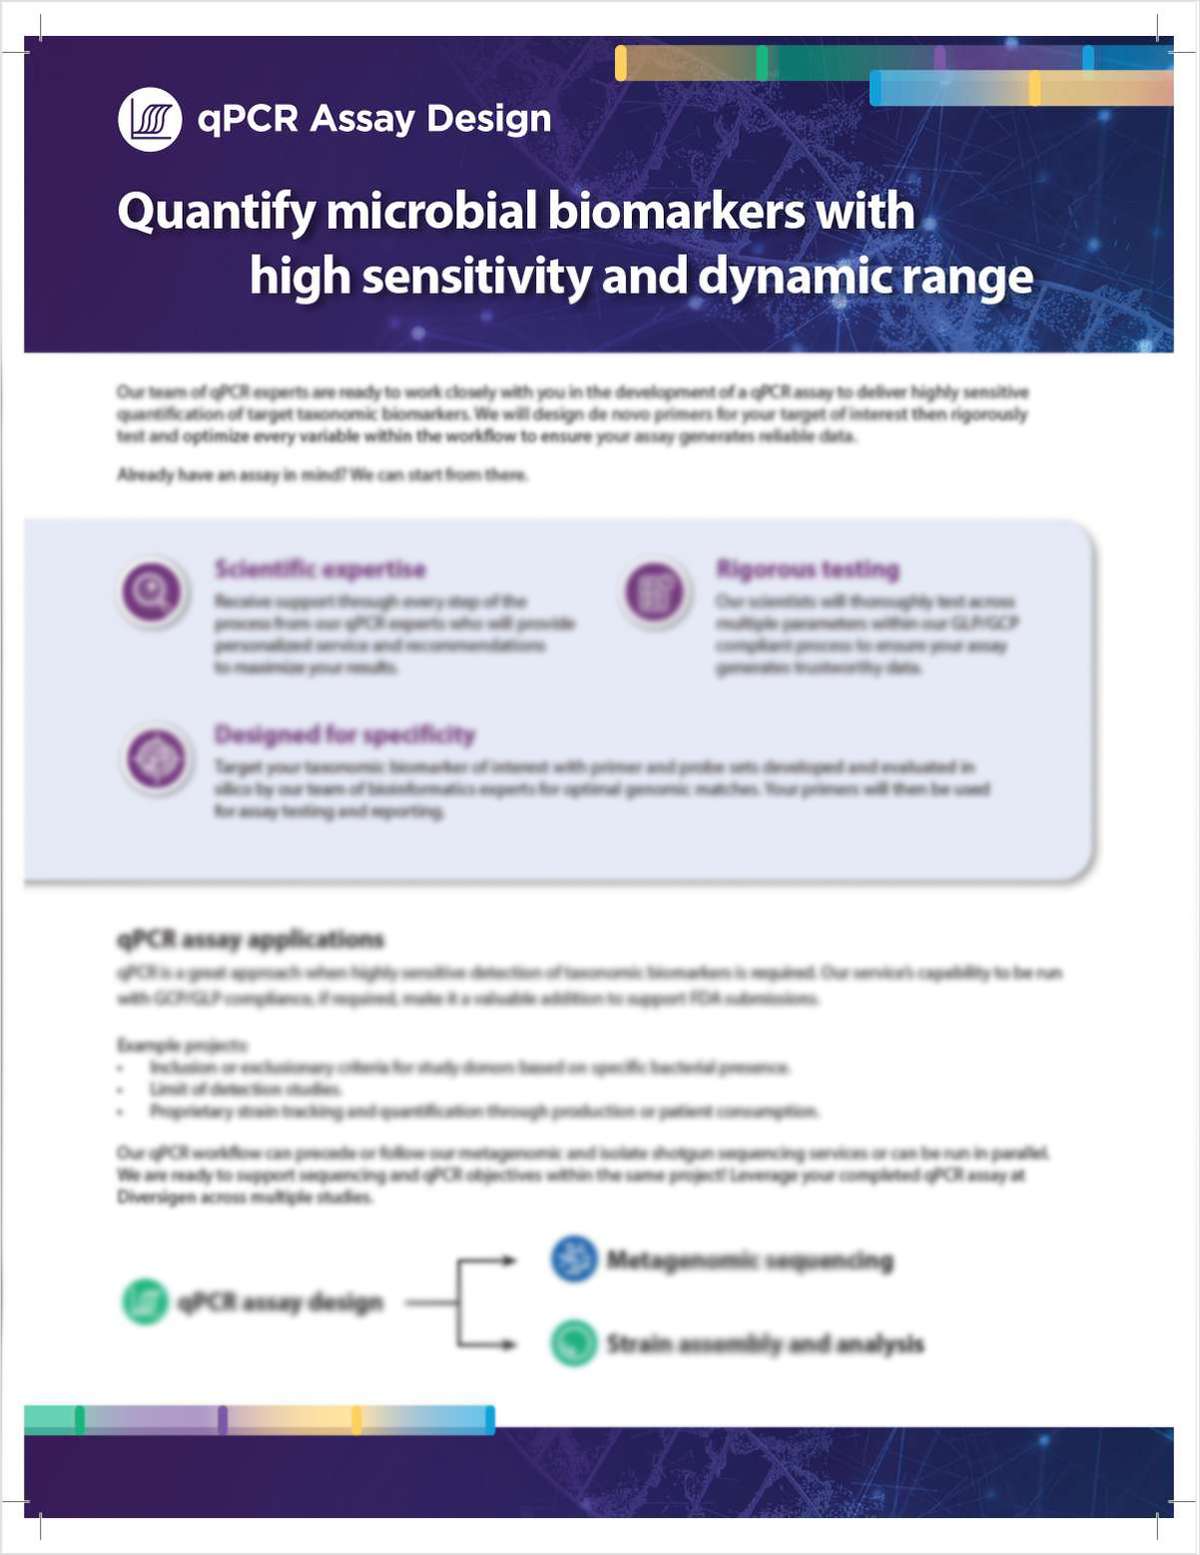 qPCR Assay Design - Quantify microbial biomarkers with high sensitivity and dynamic range